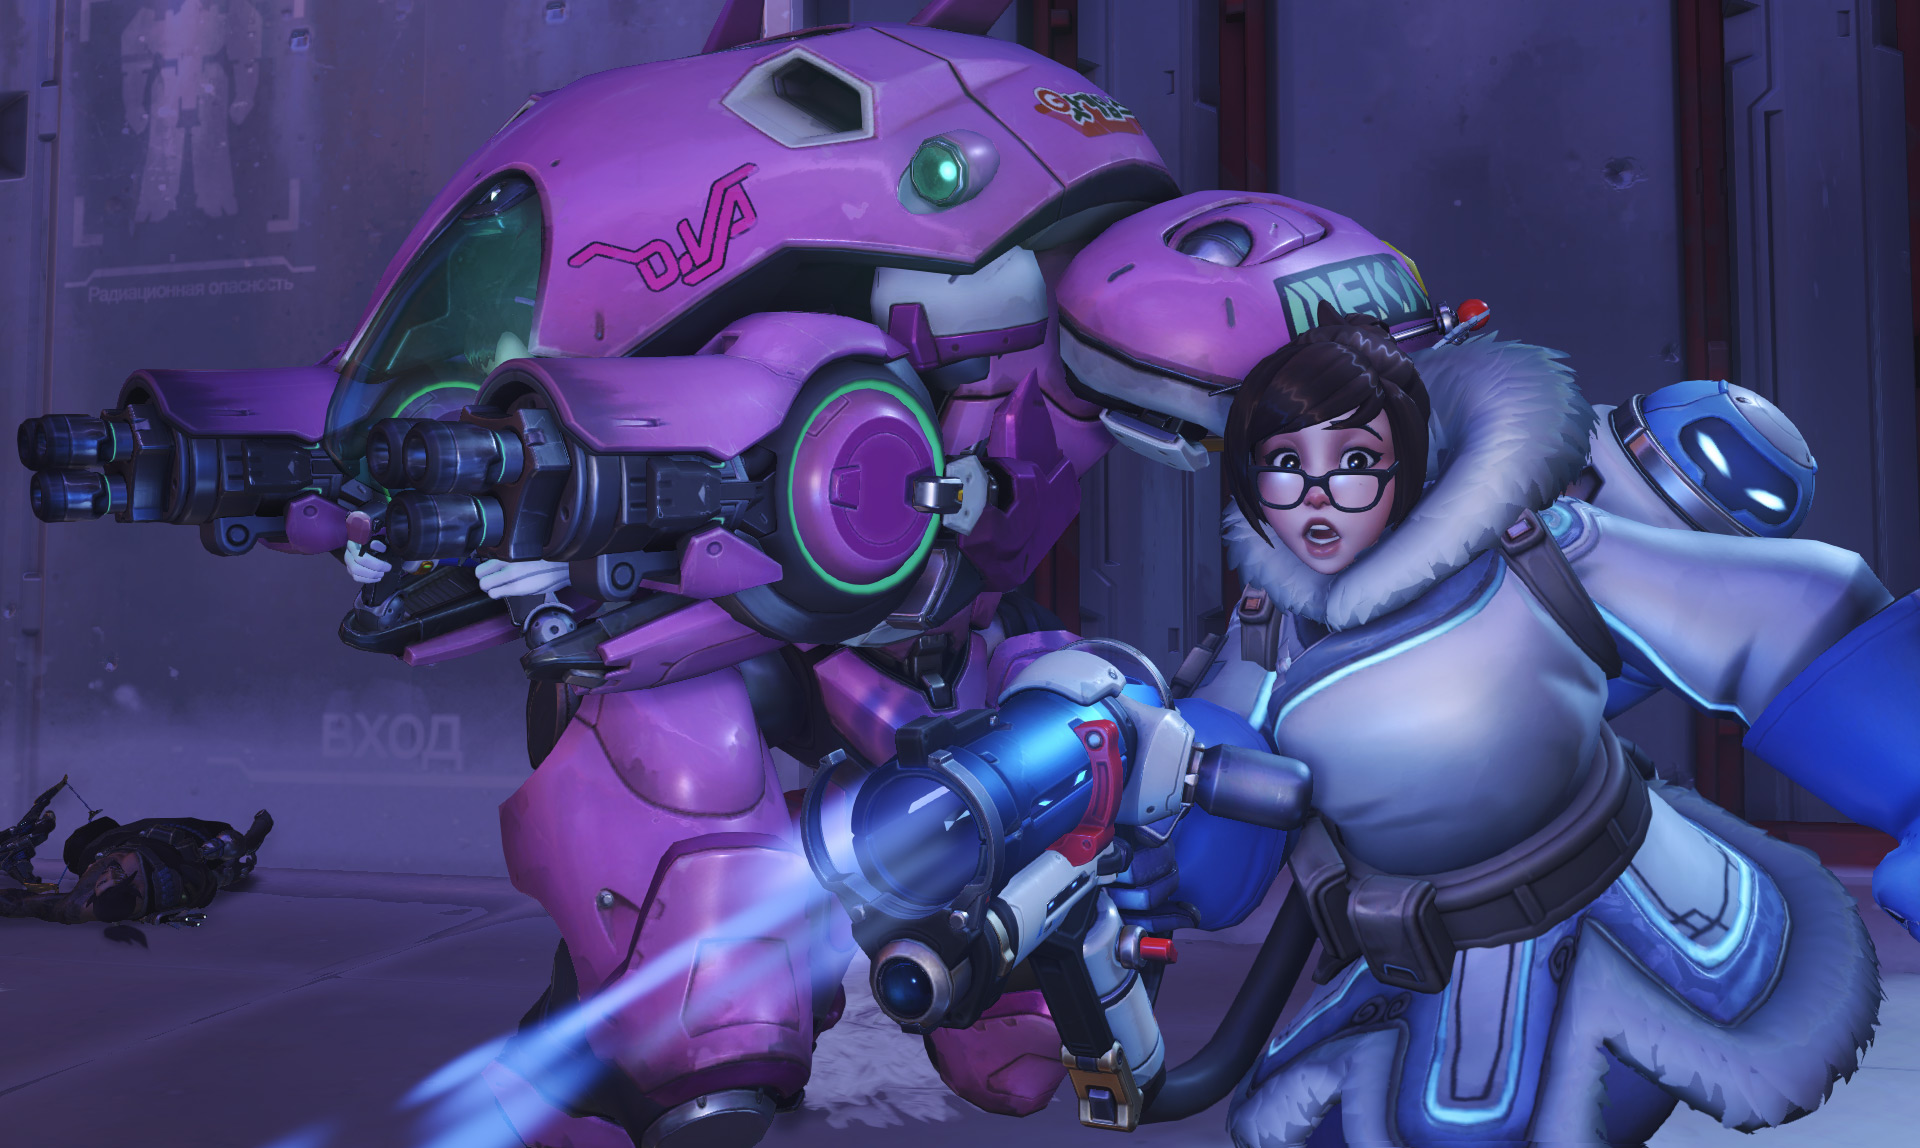 [Blizzcon 2015] Activision Blizzard officially announces Overwatch for Xbox One, PS4